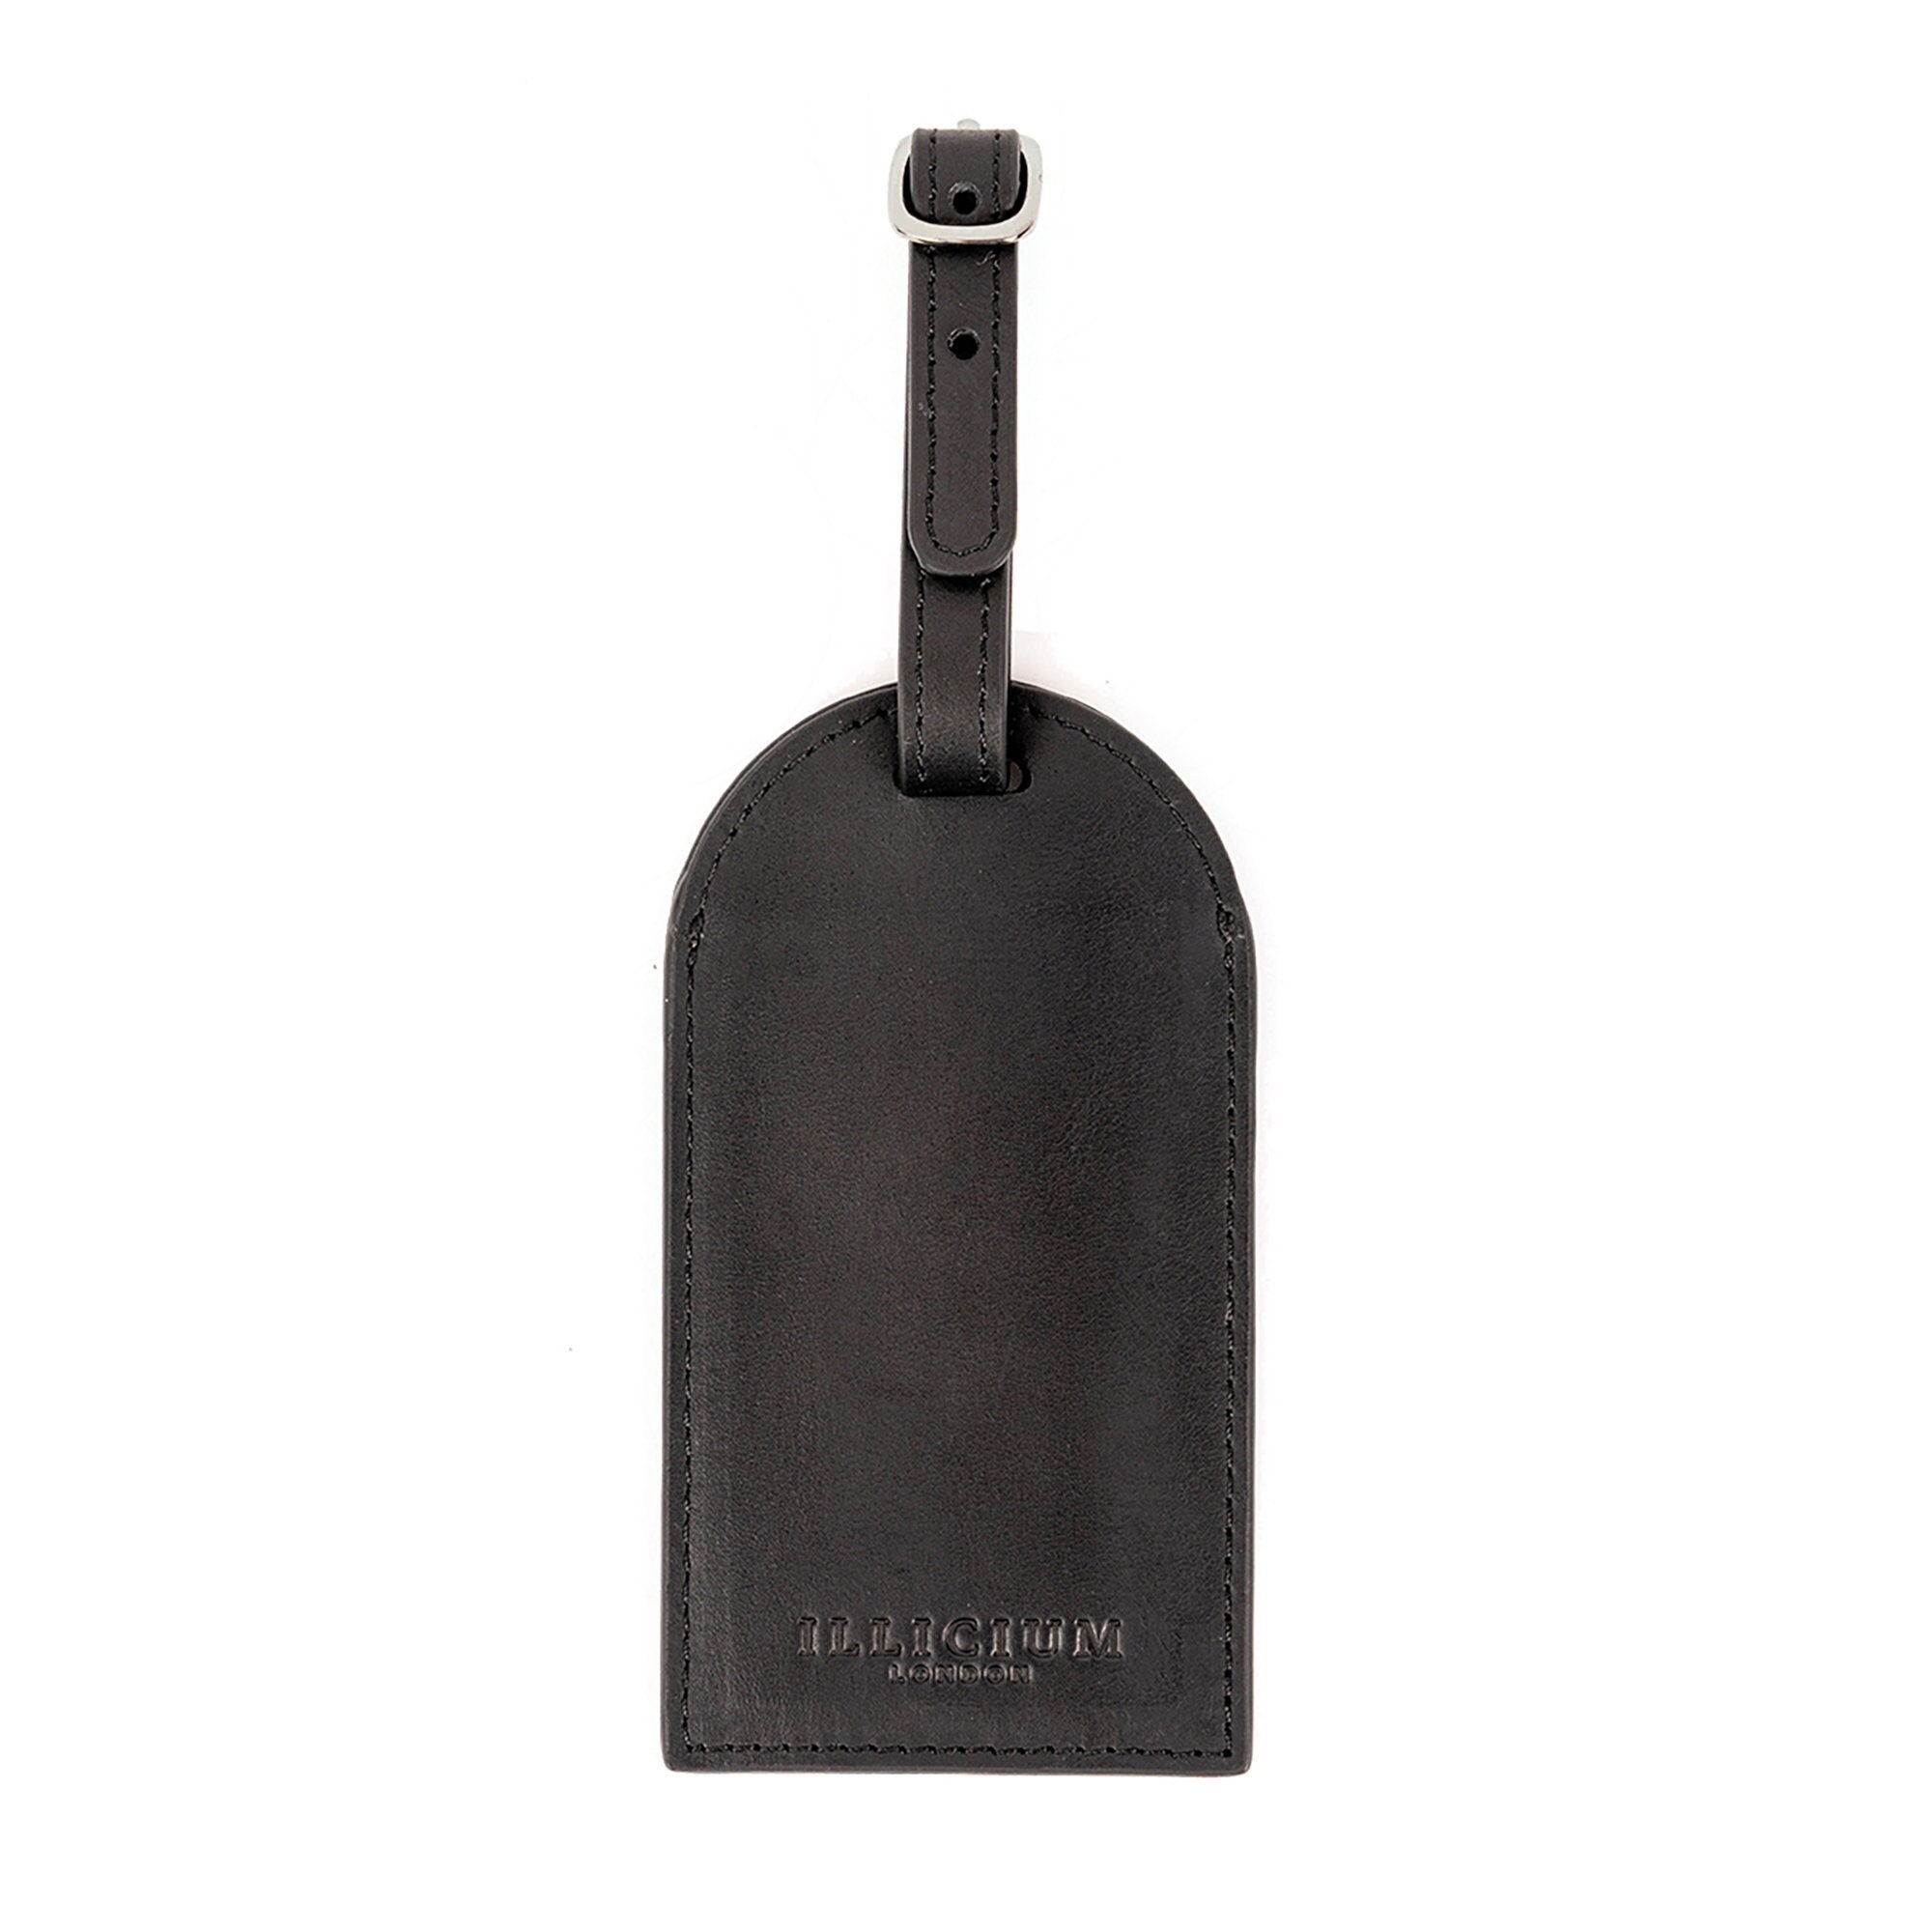 LOUIS VUITTON French Company Luggage Tag